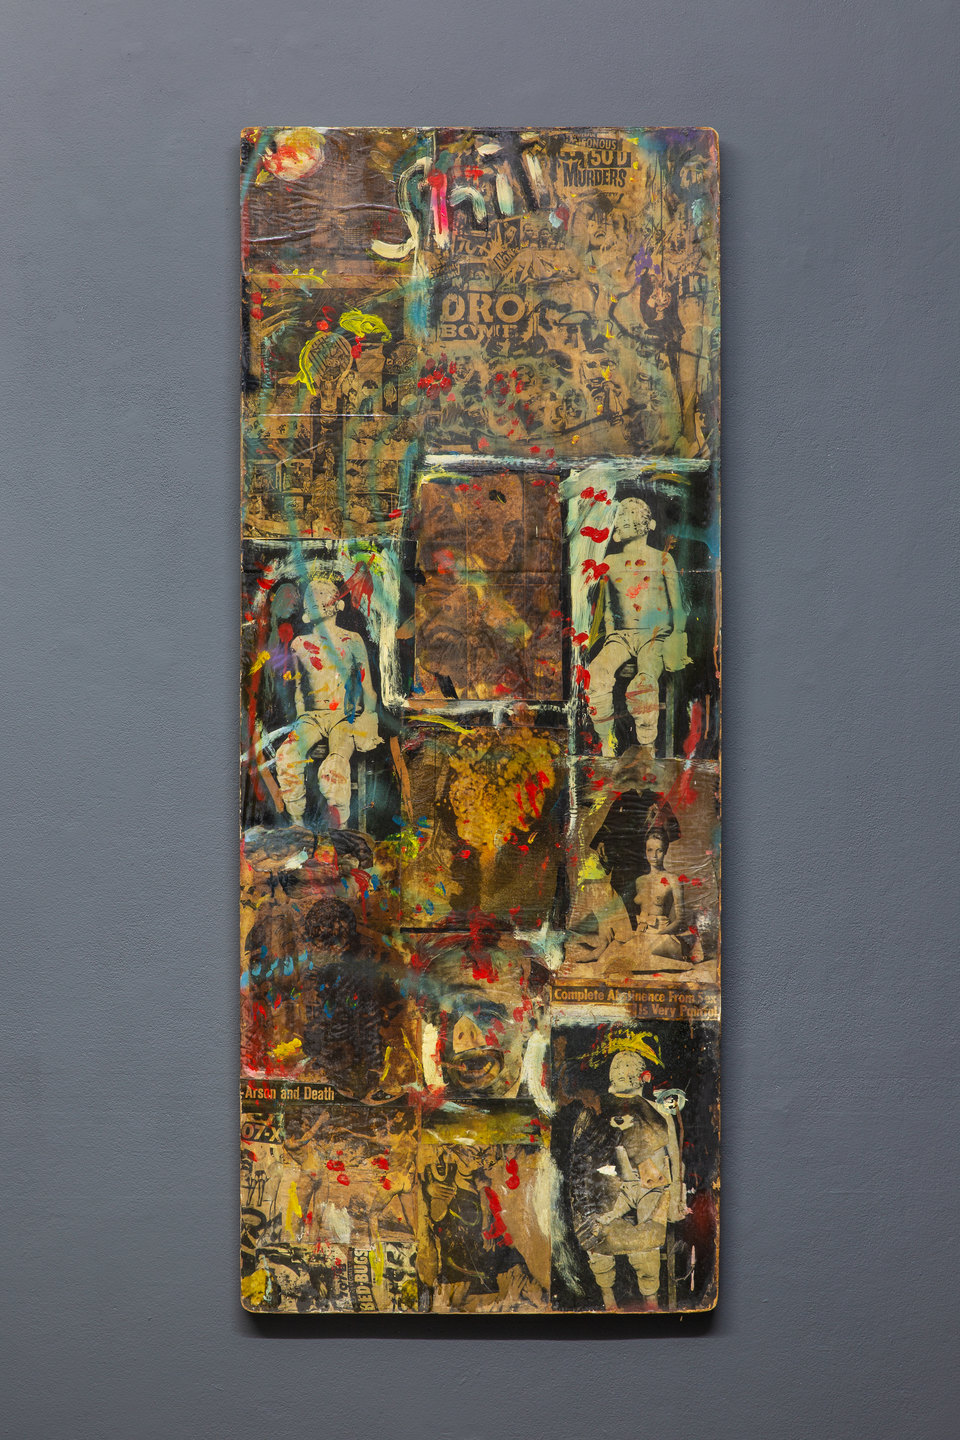 Stanley Fisher, 'Untitled', c. 1961–1963, Oil paint and paper collage on Masonite, 170 x 69cm, Shit and Doom - NO!art, 2019, Cell Project Space